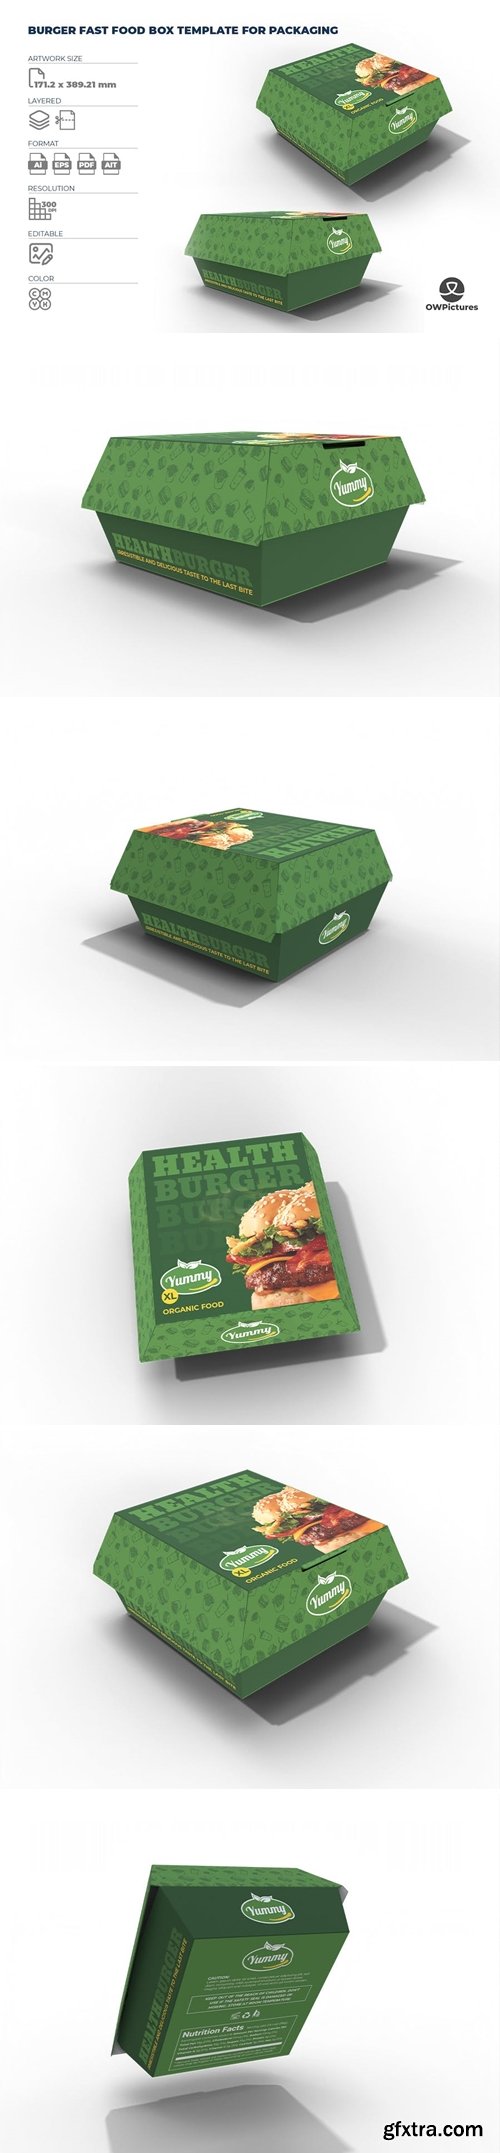 Burger Fast Food Box Template for Packaging 8AKALWU